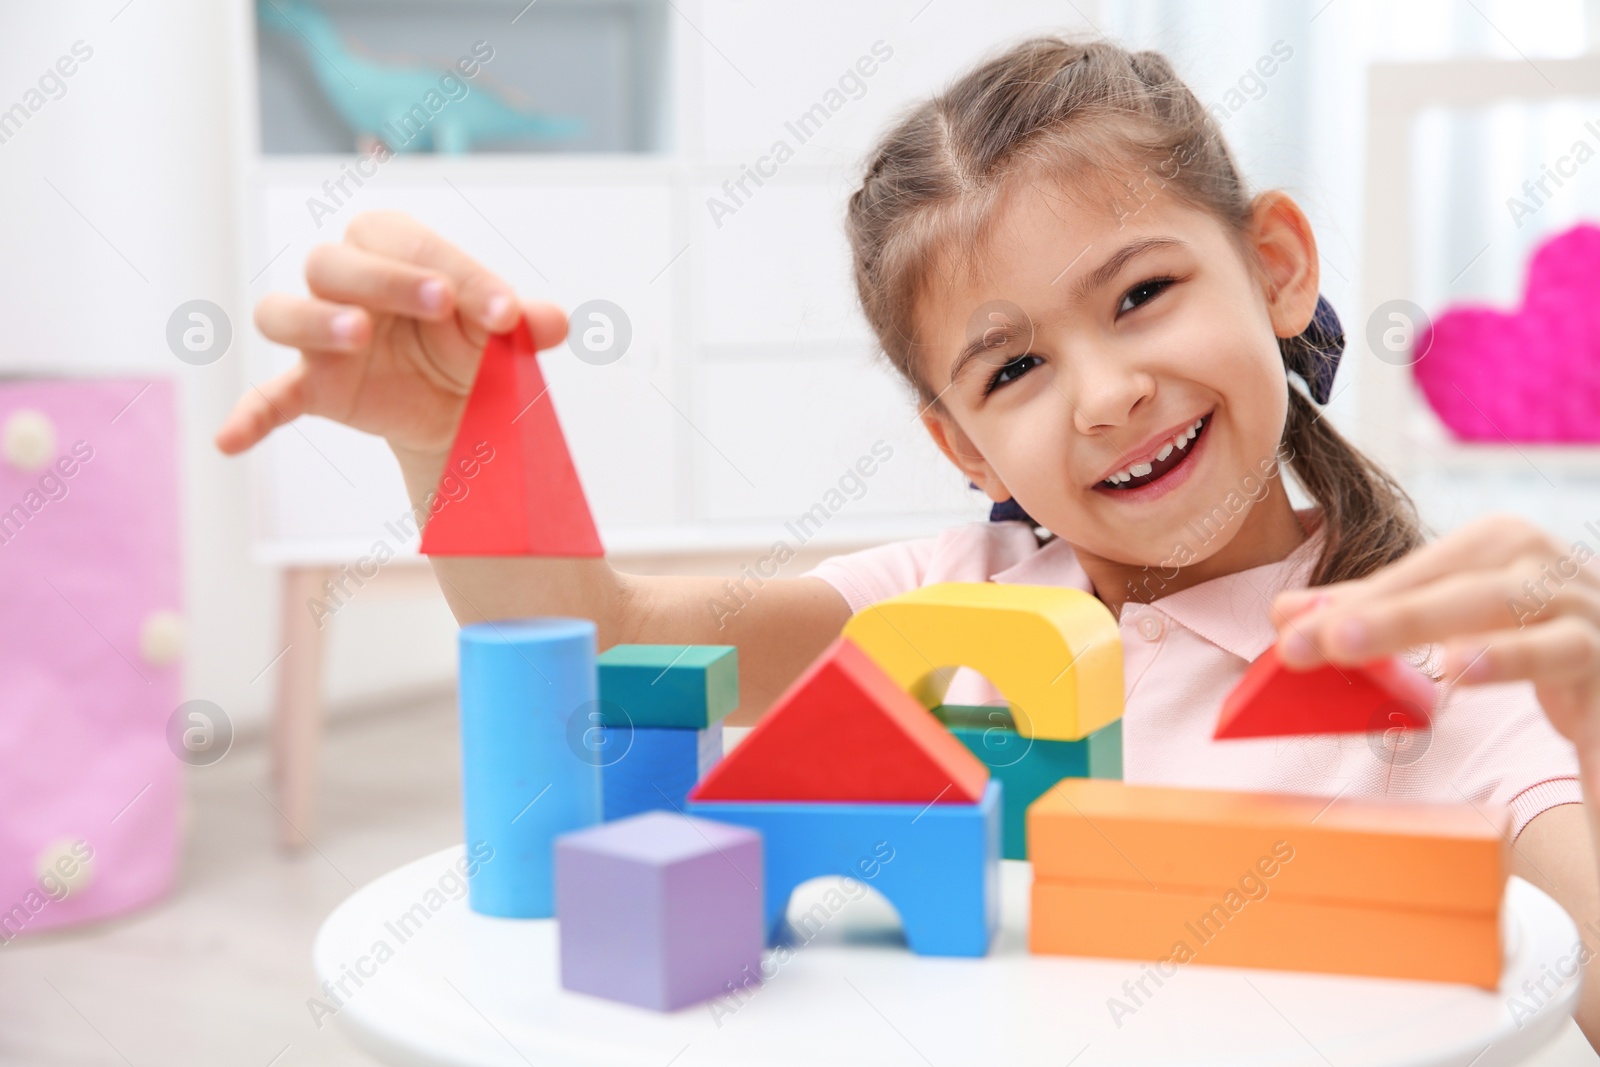 Photo of Cute child playing with colorful blocks at home